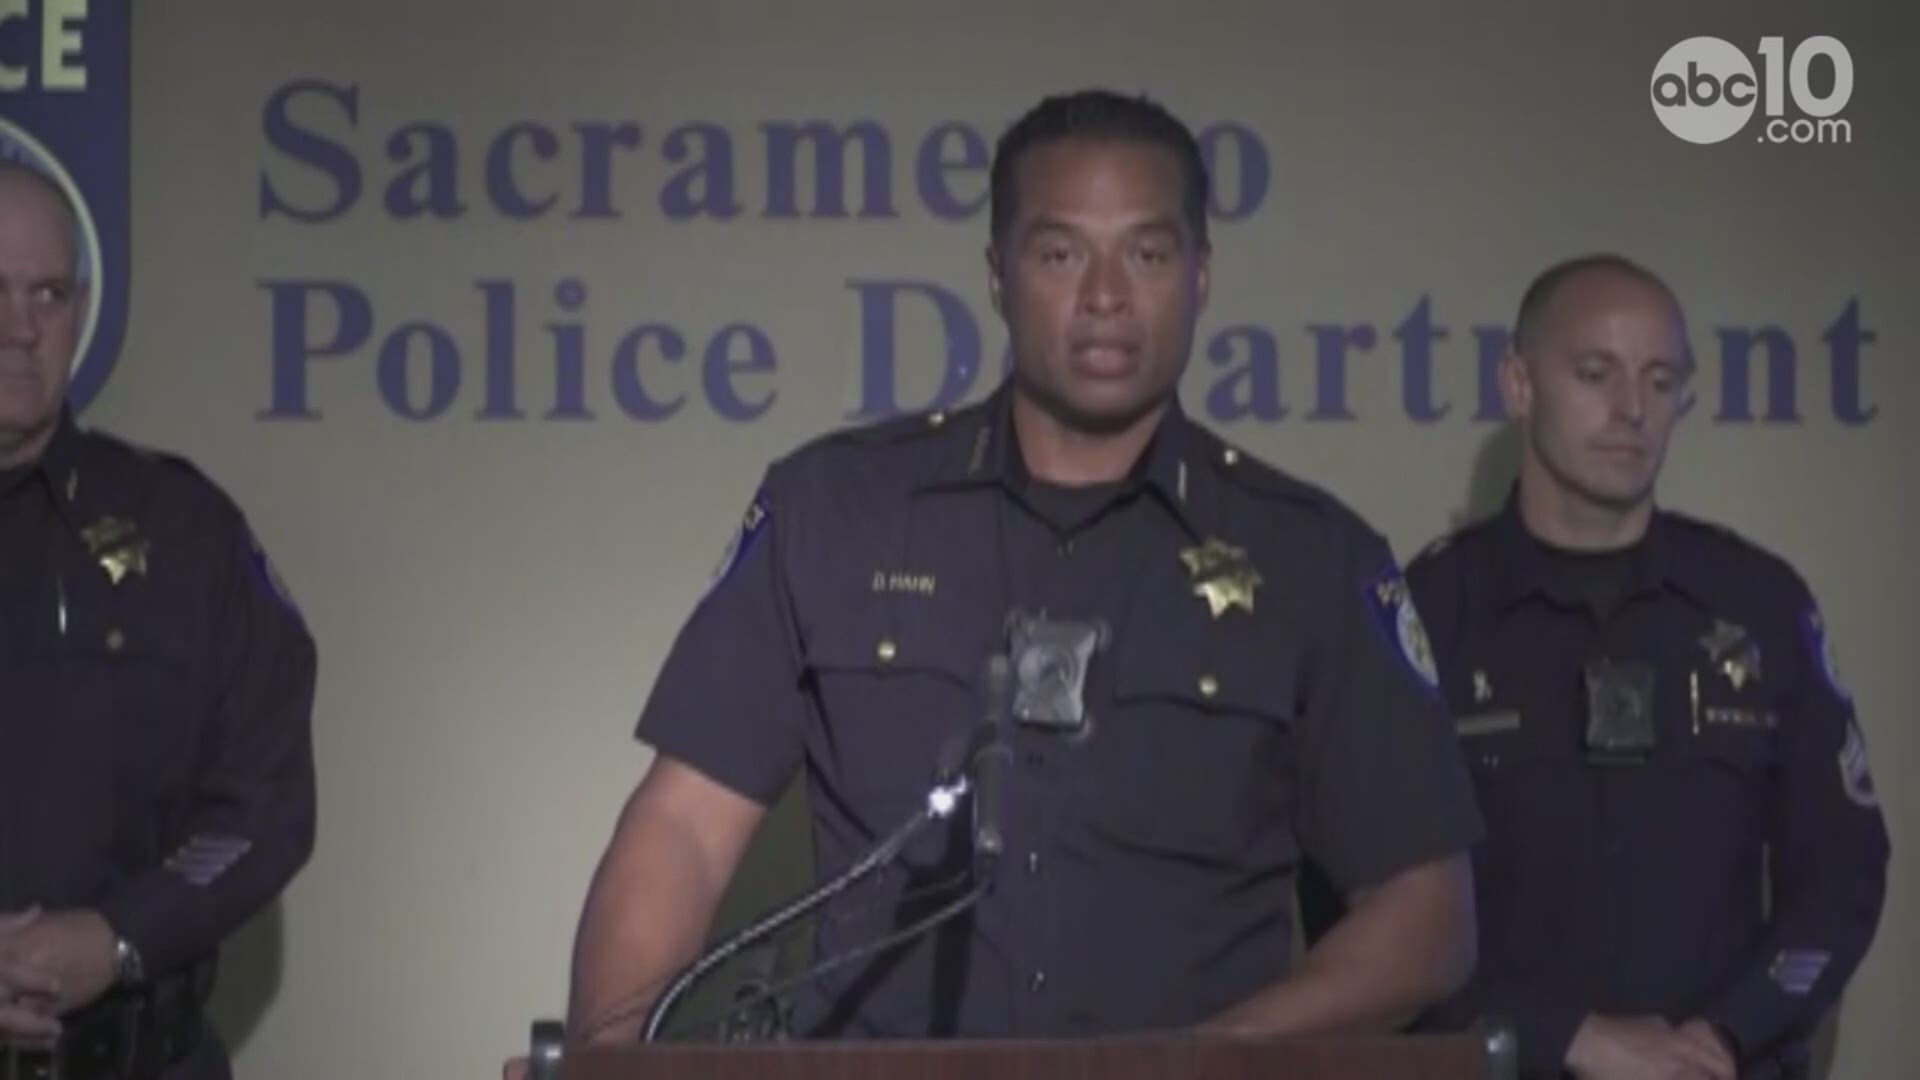 Sacramento Police Officer Tara O'Sullivan shooting:  Friday, June 22 news conference.
Body cam footage of another officer is played.
Chief Daniel Hahn and Sgt. Vance Chandler update the investigation and gun details from the suspect.